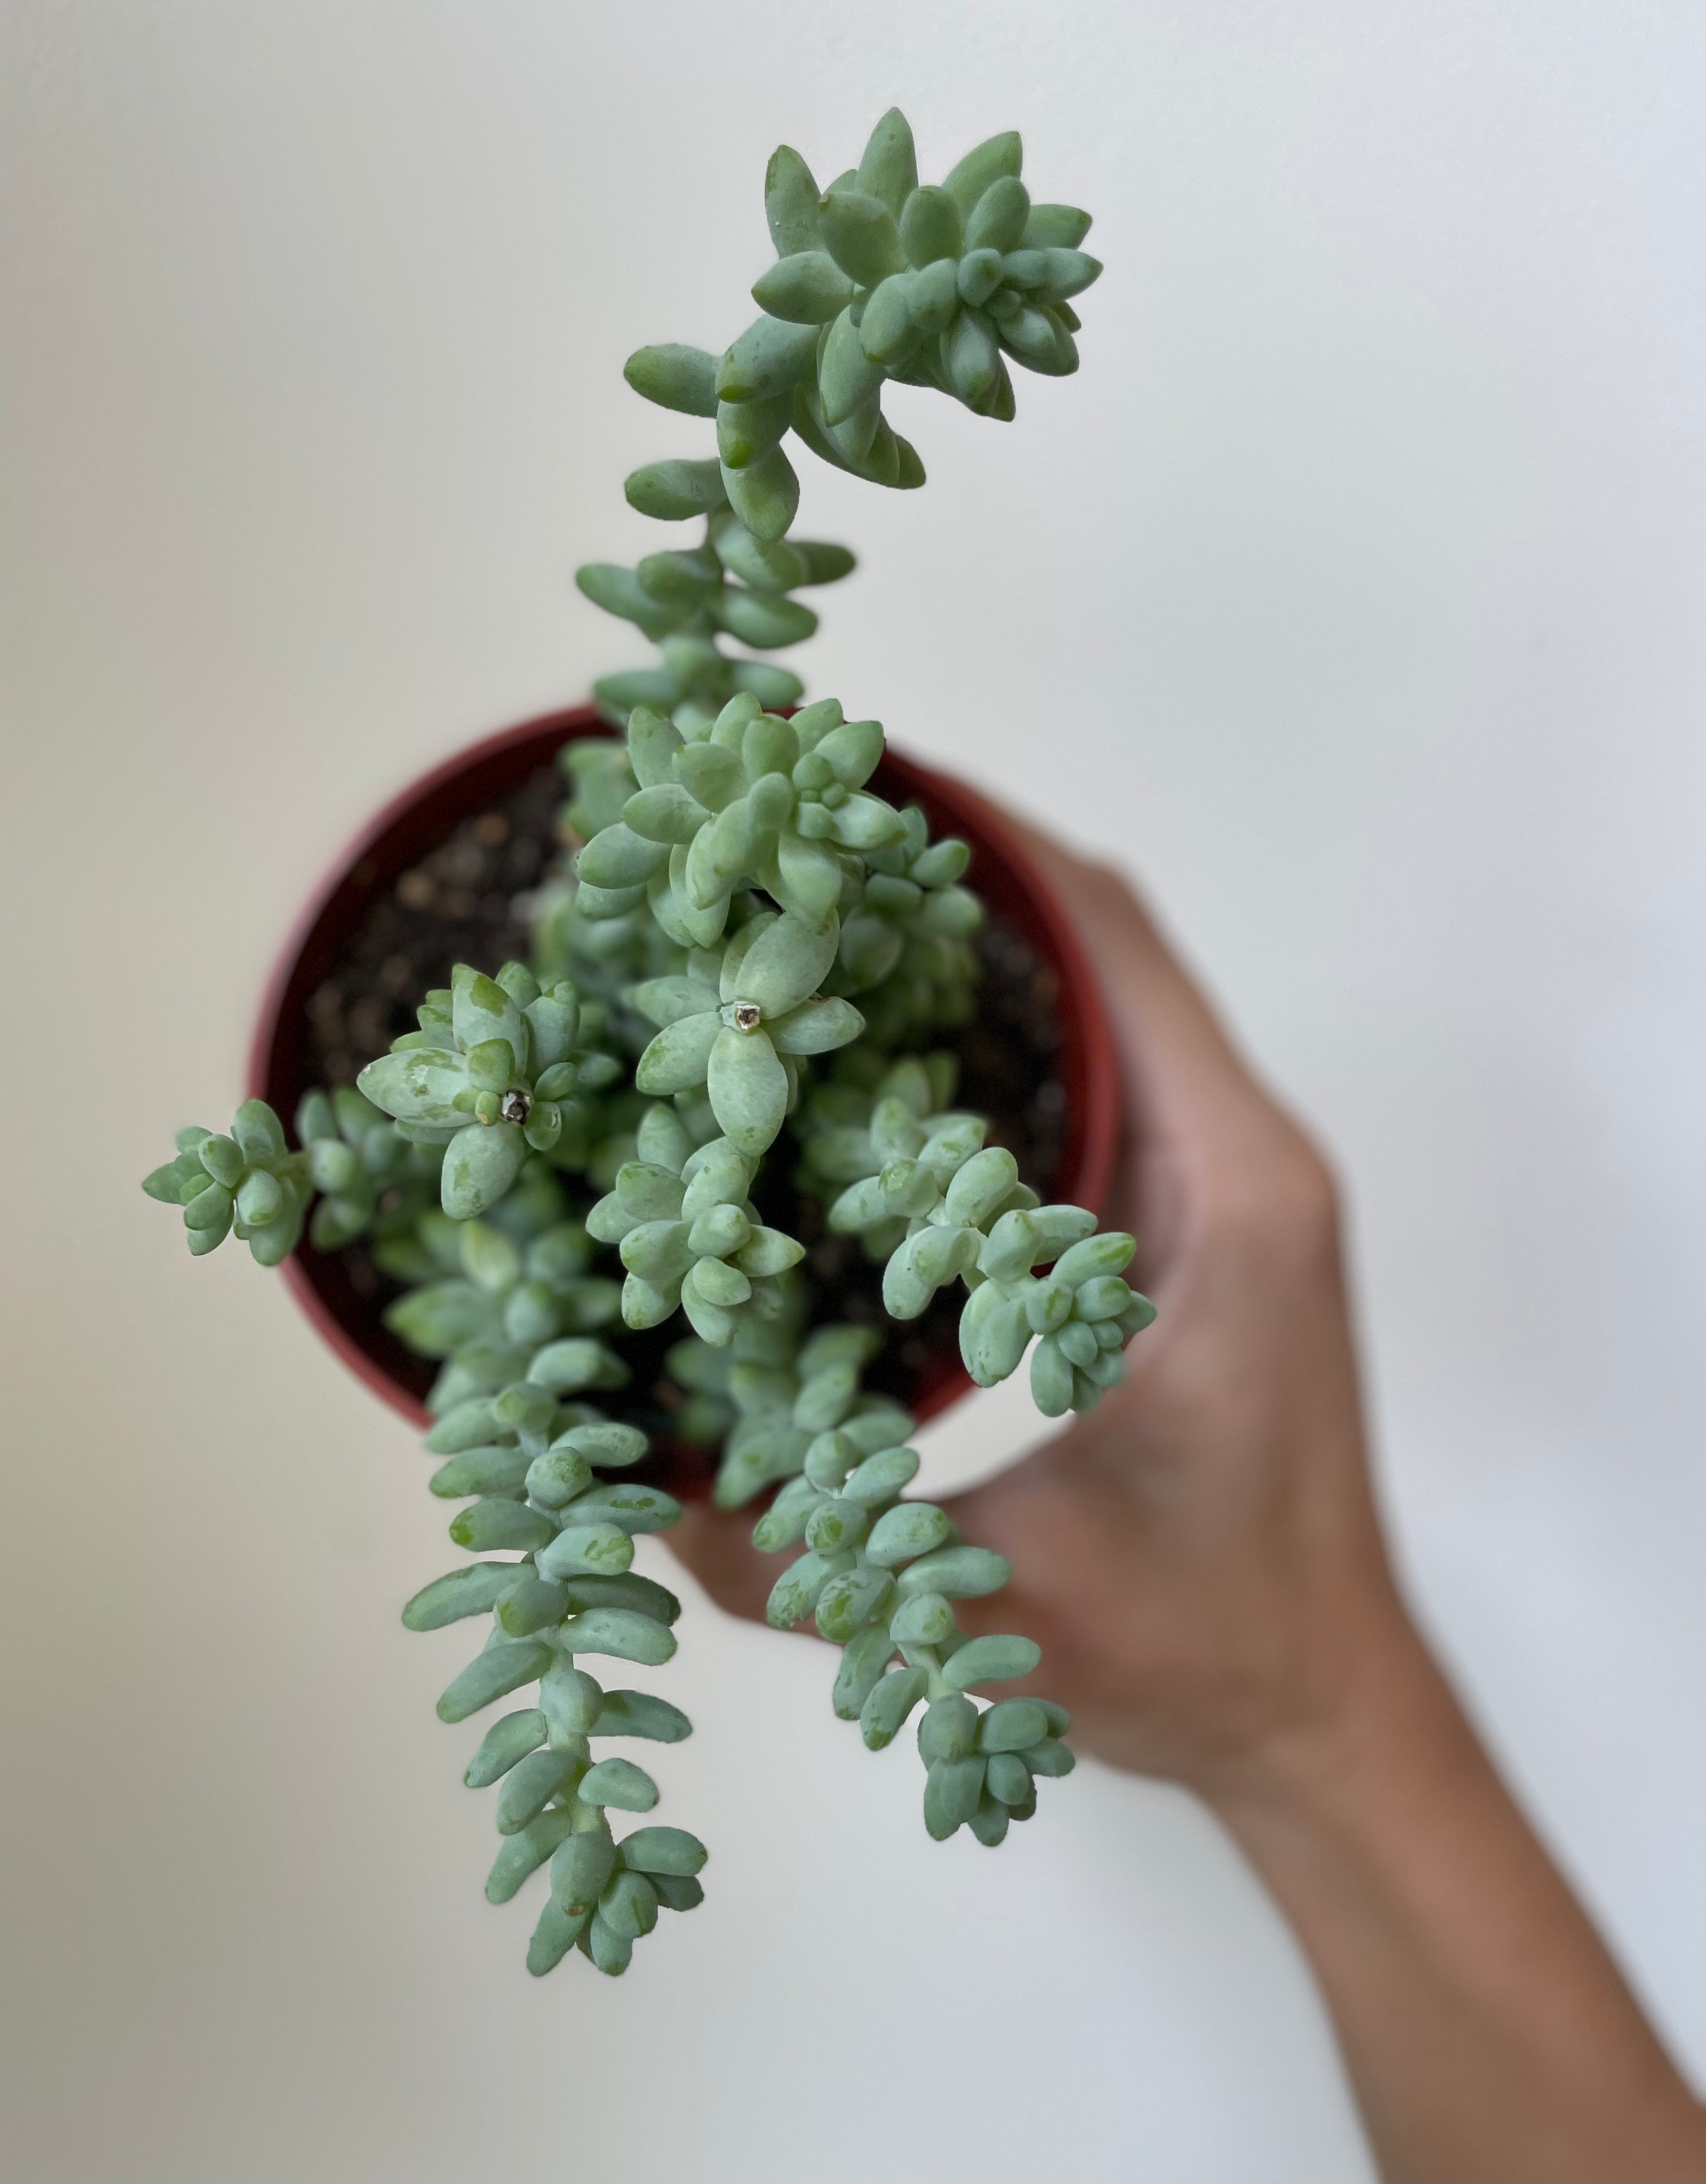 Succulent 'Donkey's Tail'